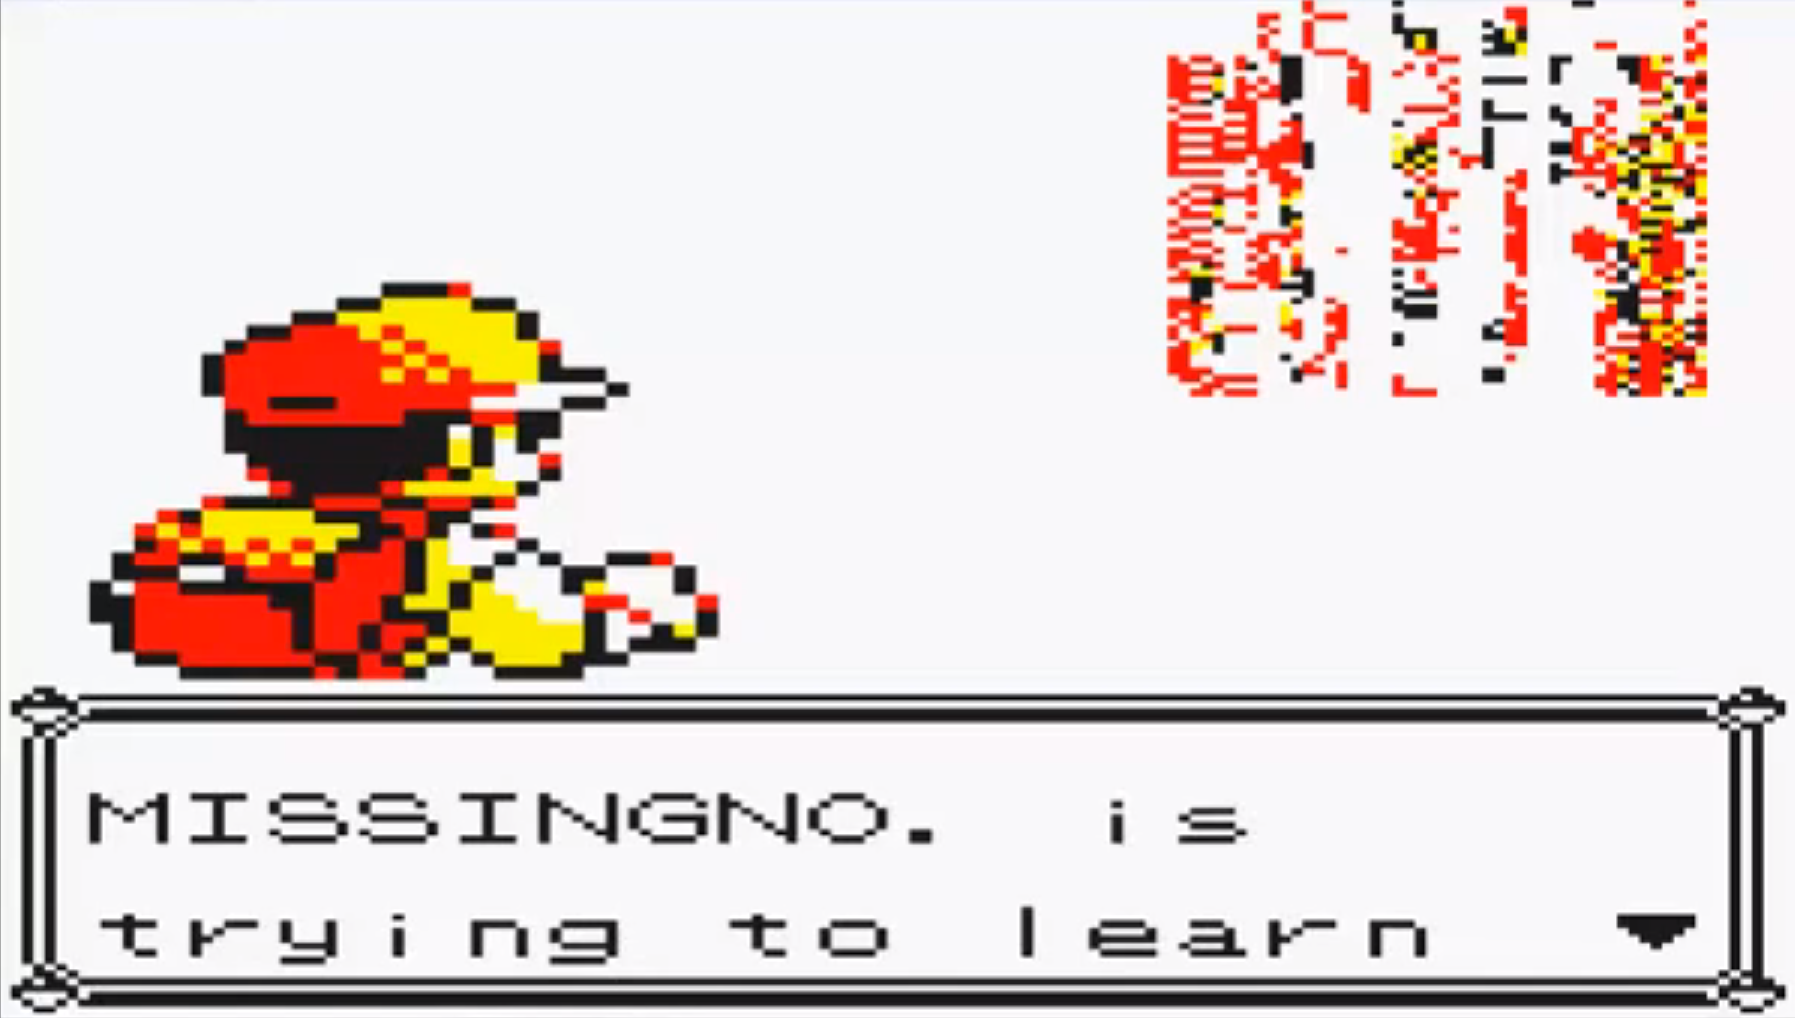 How to Catch Missingno. in Pokémon Red and Blue: 6 Steps